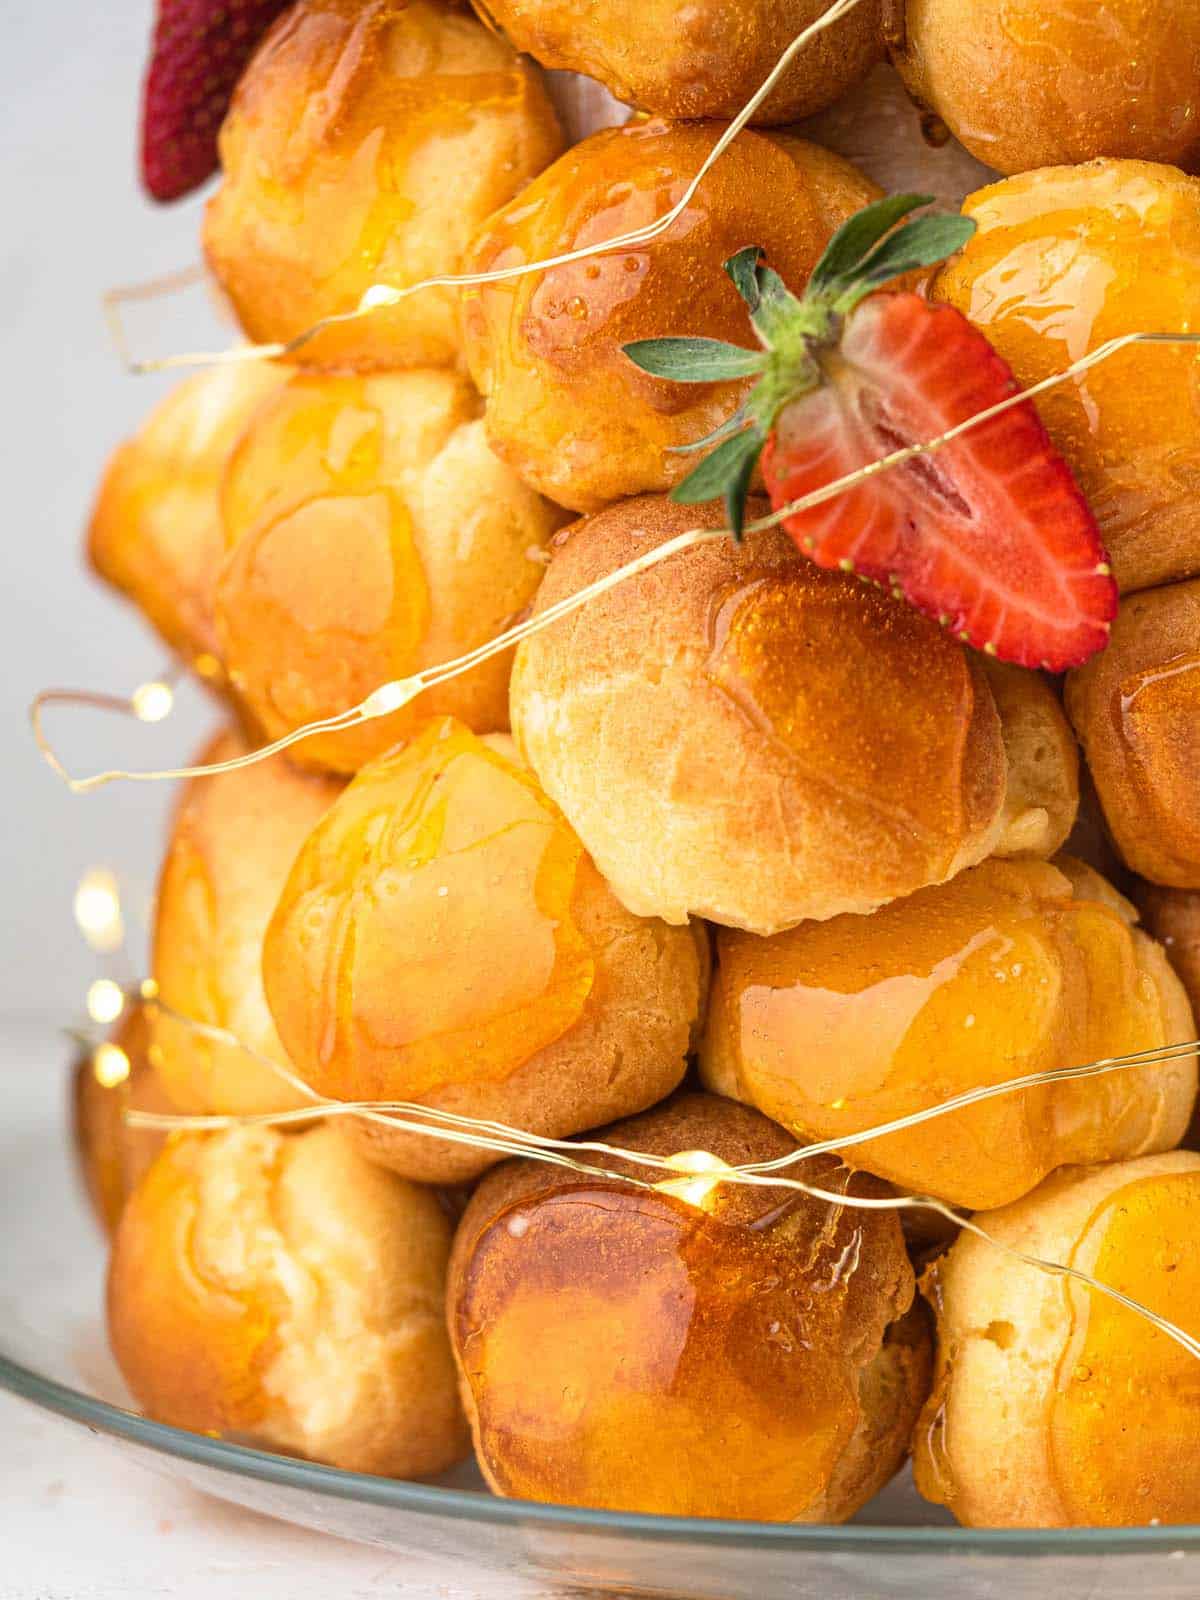 croquembouche with cream puffs filled with pastry cream and topped with caramel